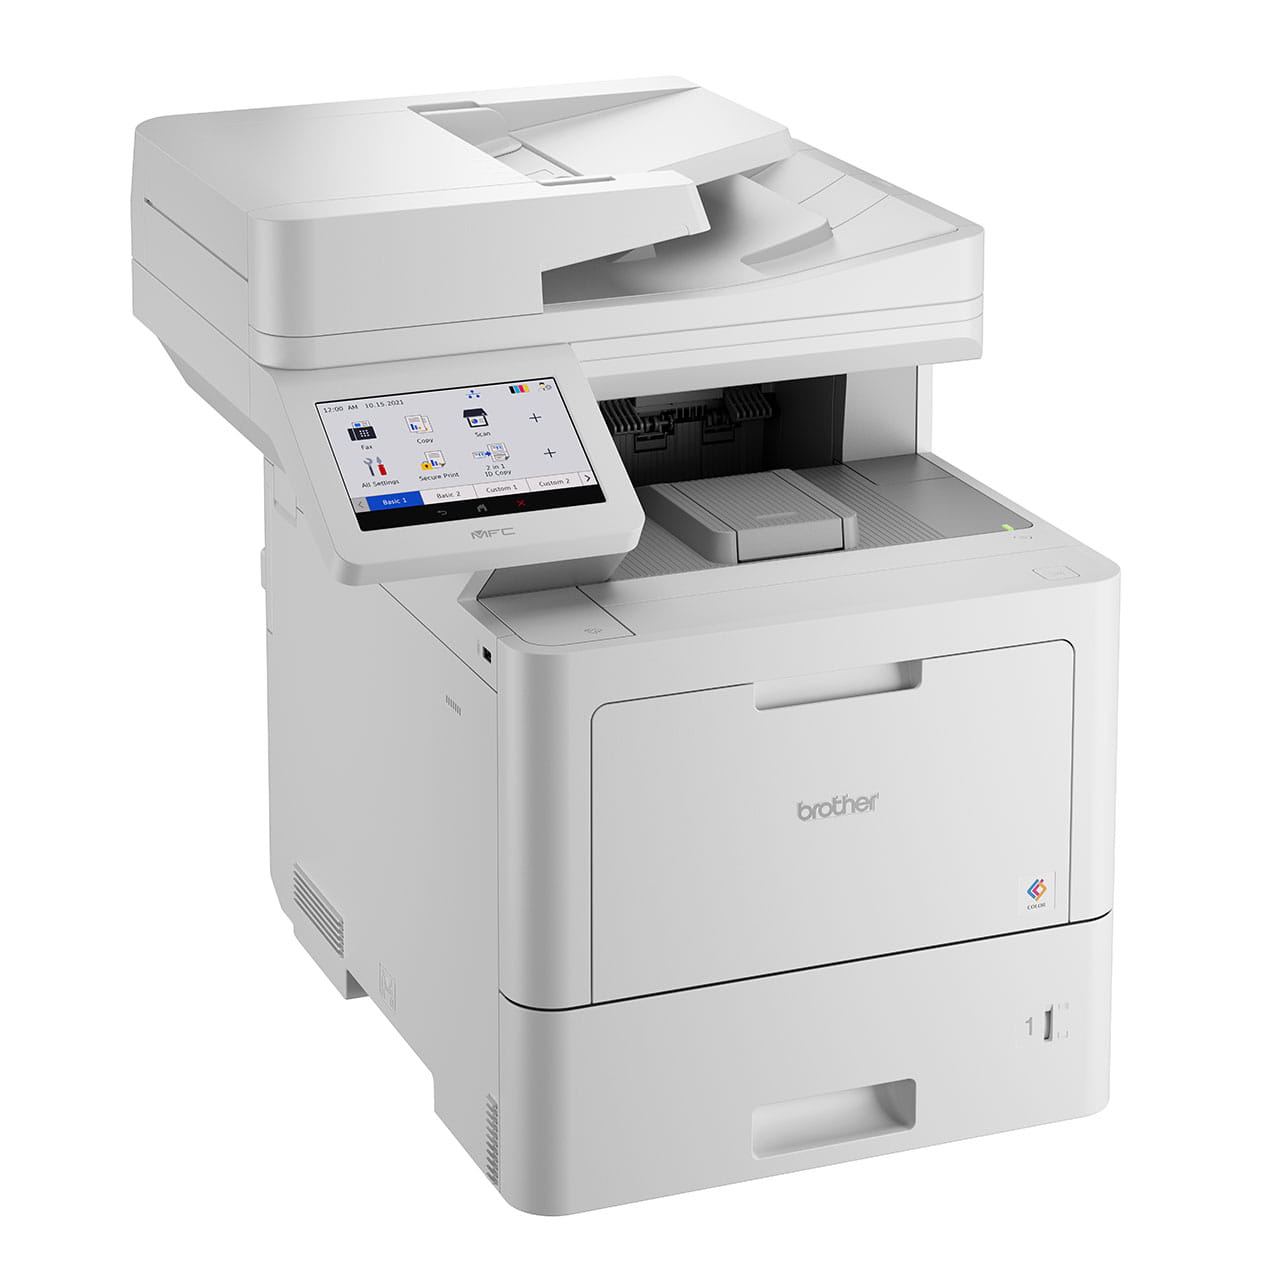 Brother MFC-L9630CDN Colour Laser Printer Right Side View